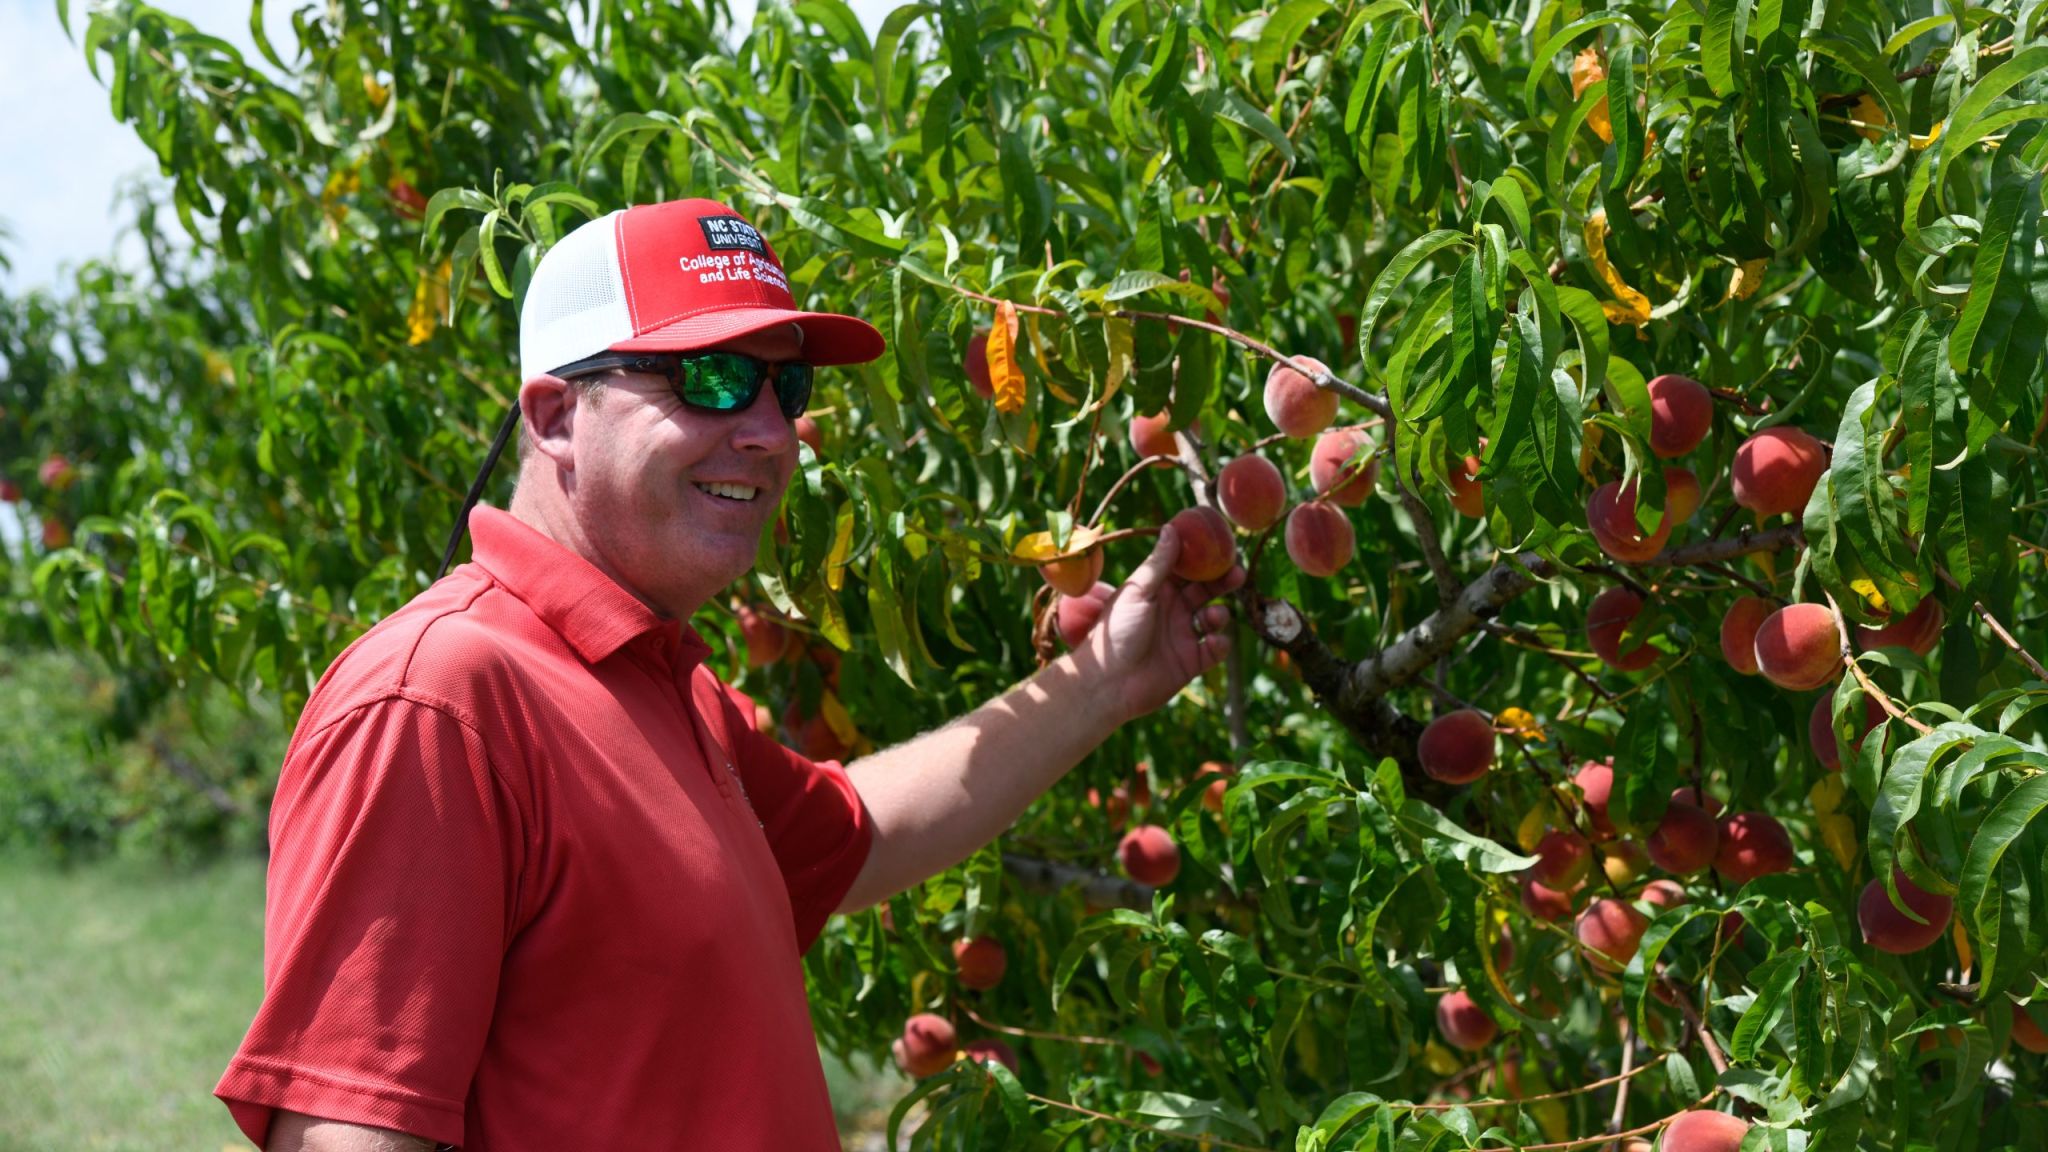 Man in sunglasses and red CALS hat reaches to hold a peach hanging from a row of peach trees.